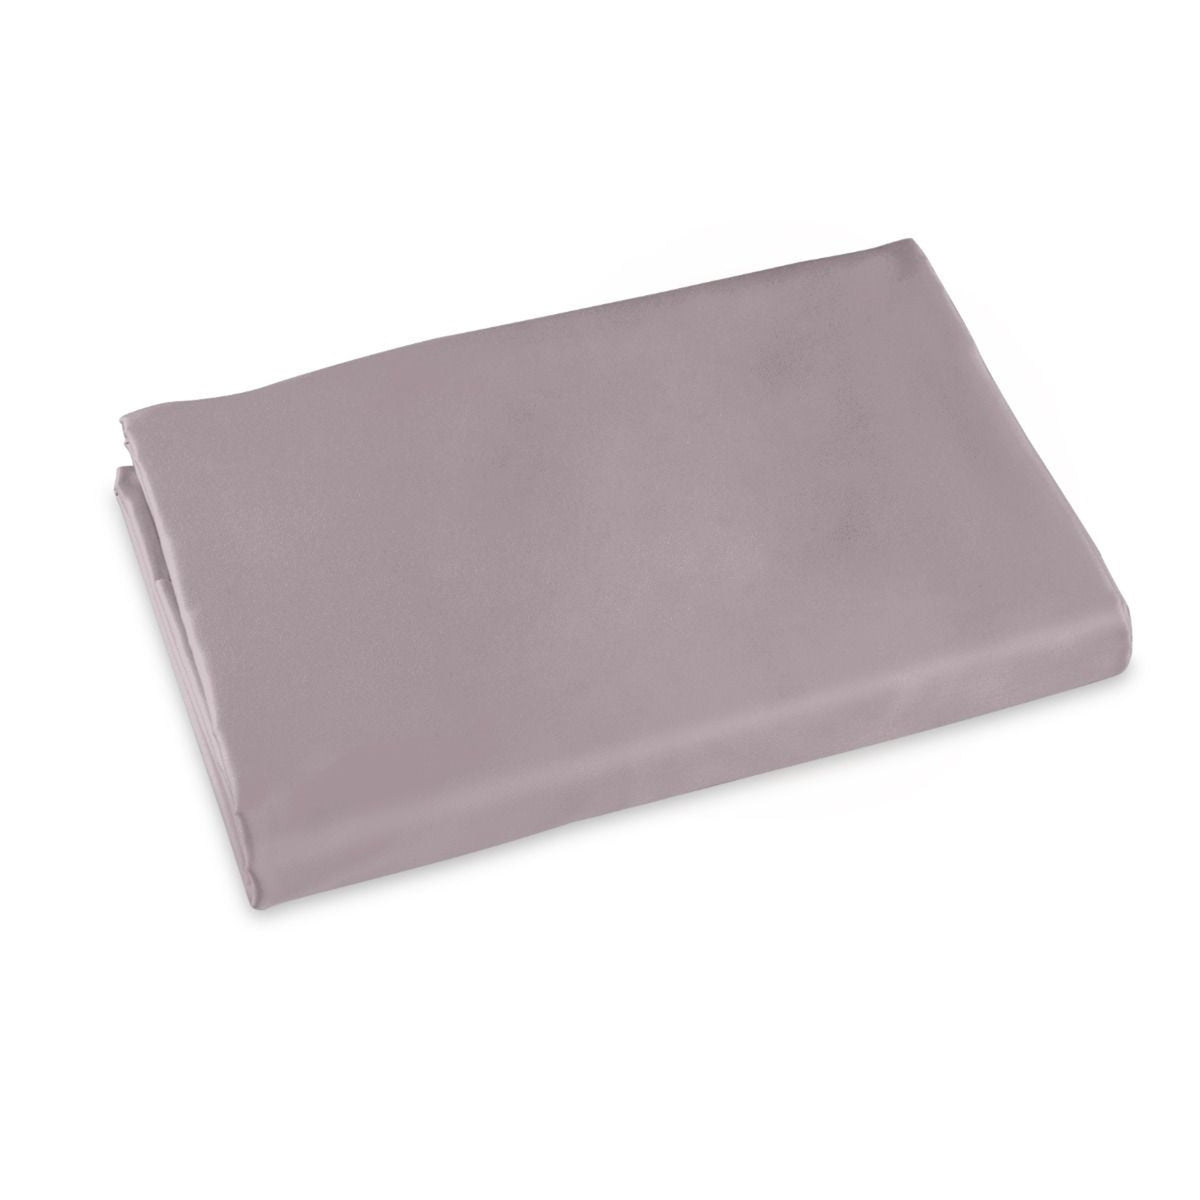 Clear Image of Signoria Raffaello Fitted Sheet in Thistle Color